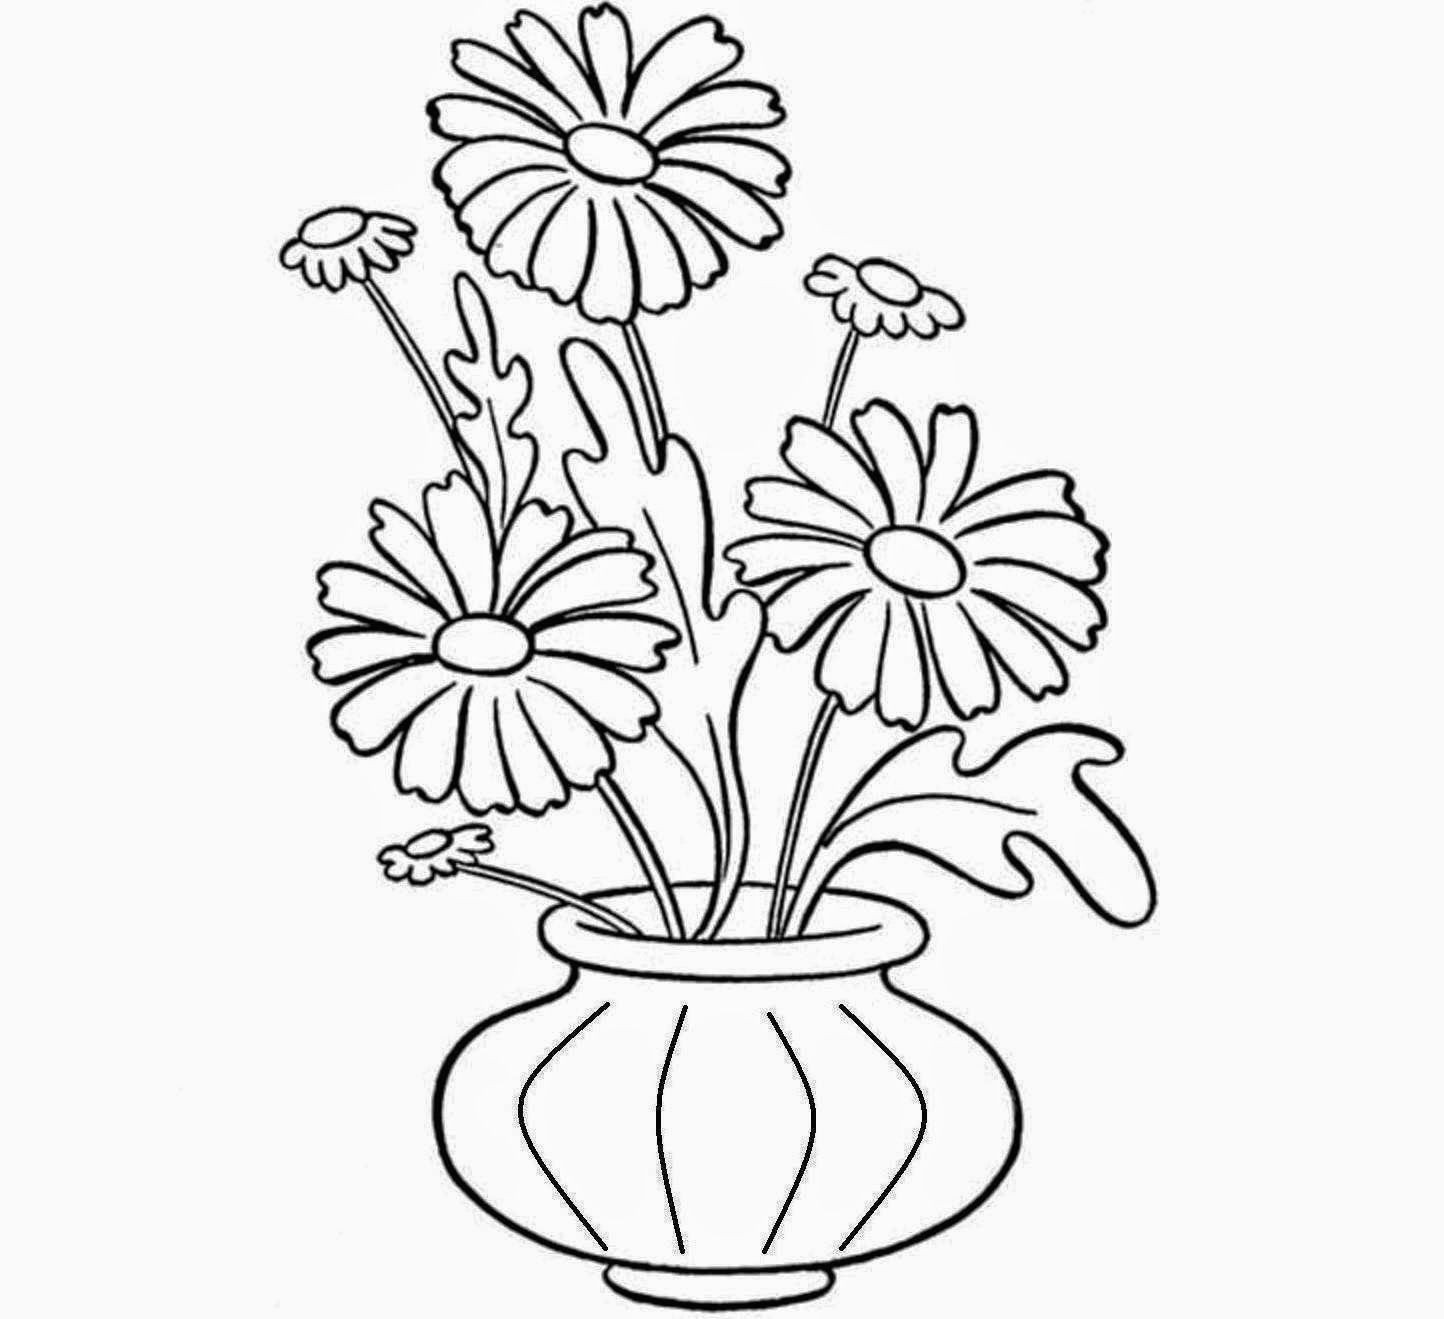 Flowers Garden Drawing Easy Mind Blowing Tips Vases Vintage Glass Vases Garden Center Pieces